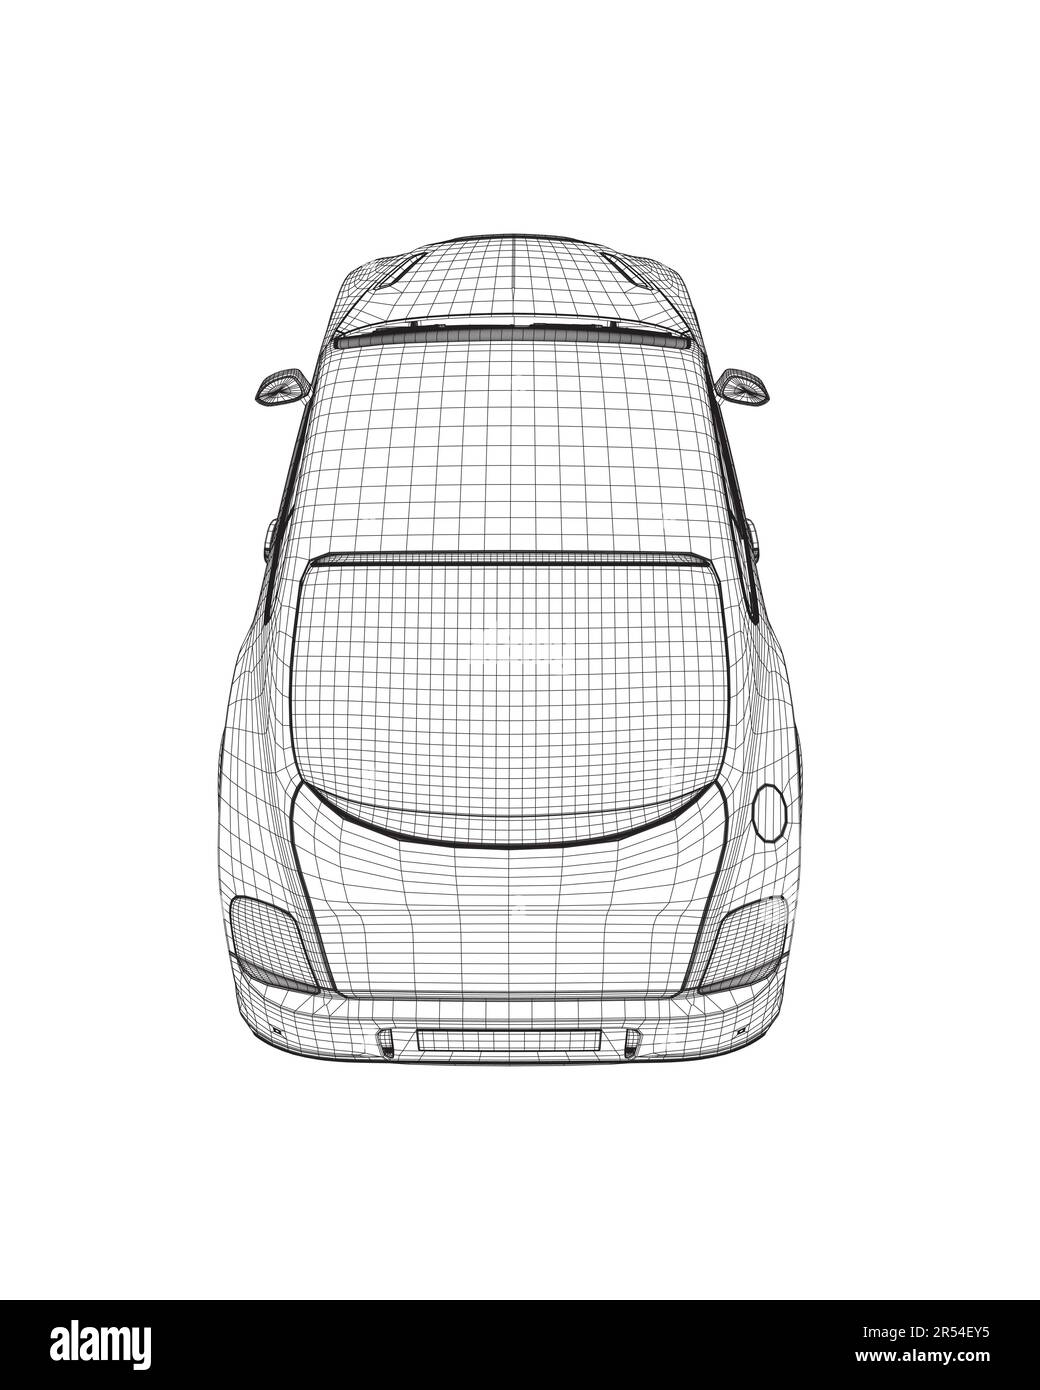 Coloring page vector line art illustration car for book and drawing. Black  contour sketch. Isolated on white background. High-speed drive vehicle.  Graphic element. Stroke without fill Stock Vector